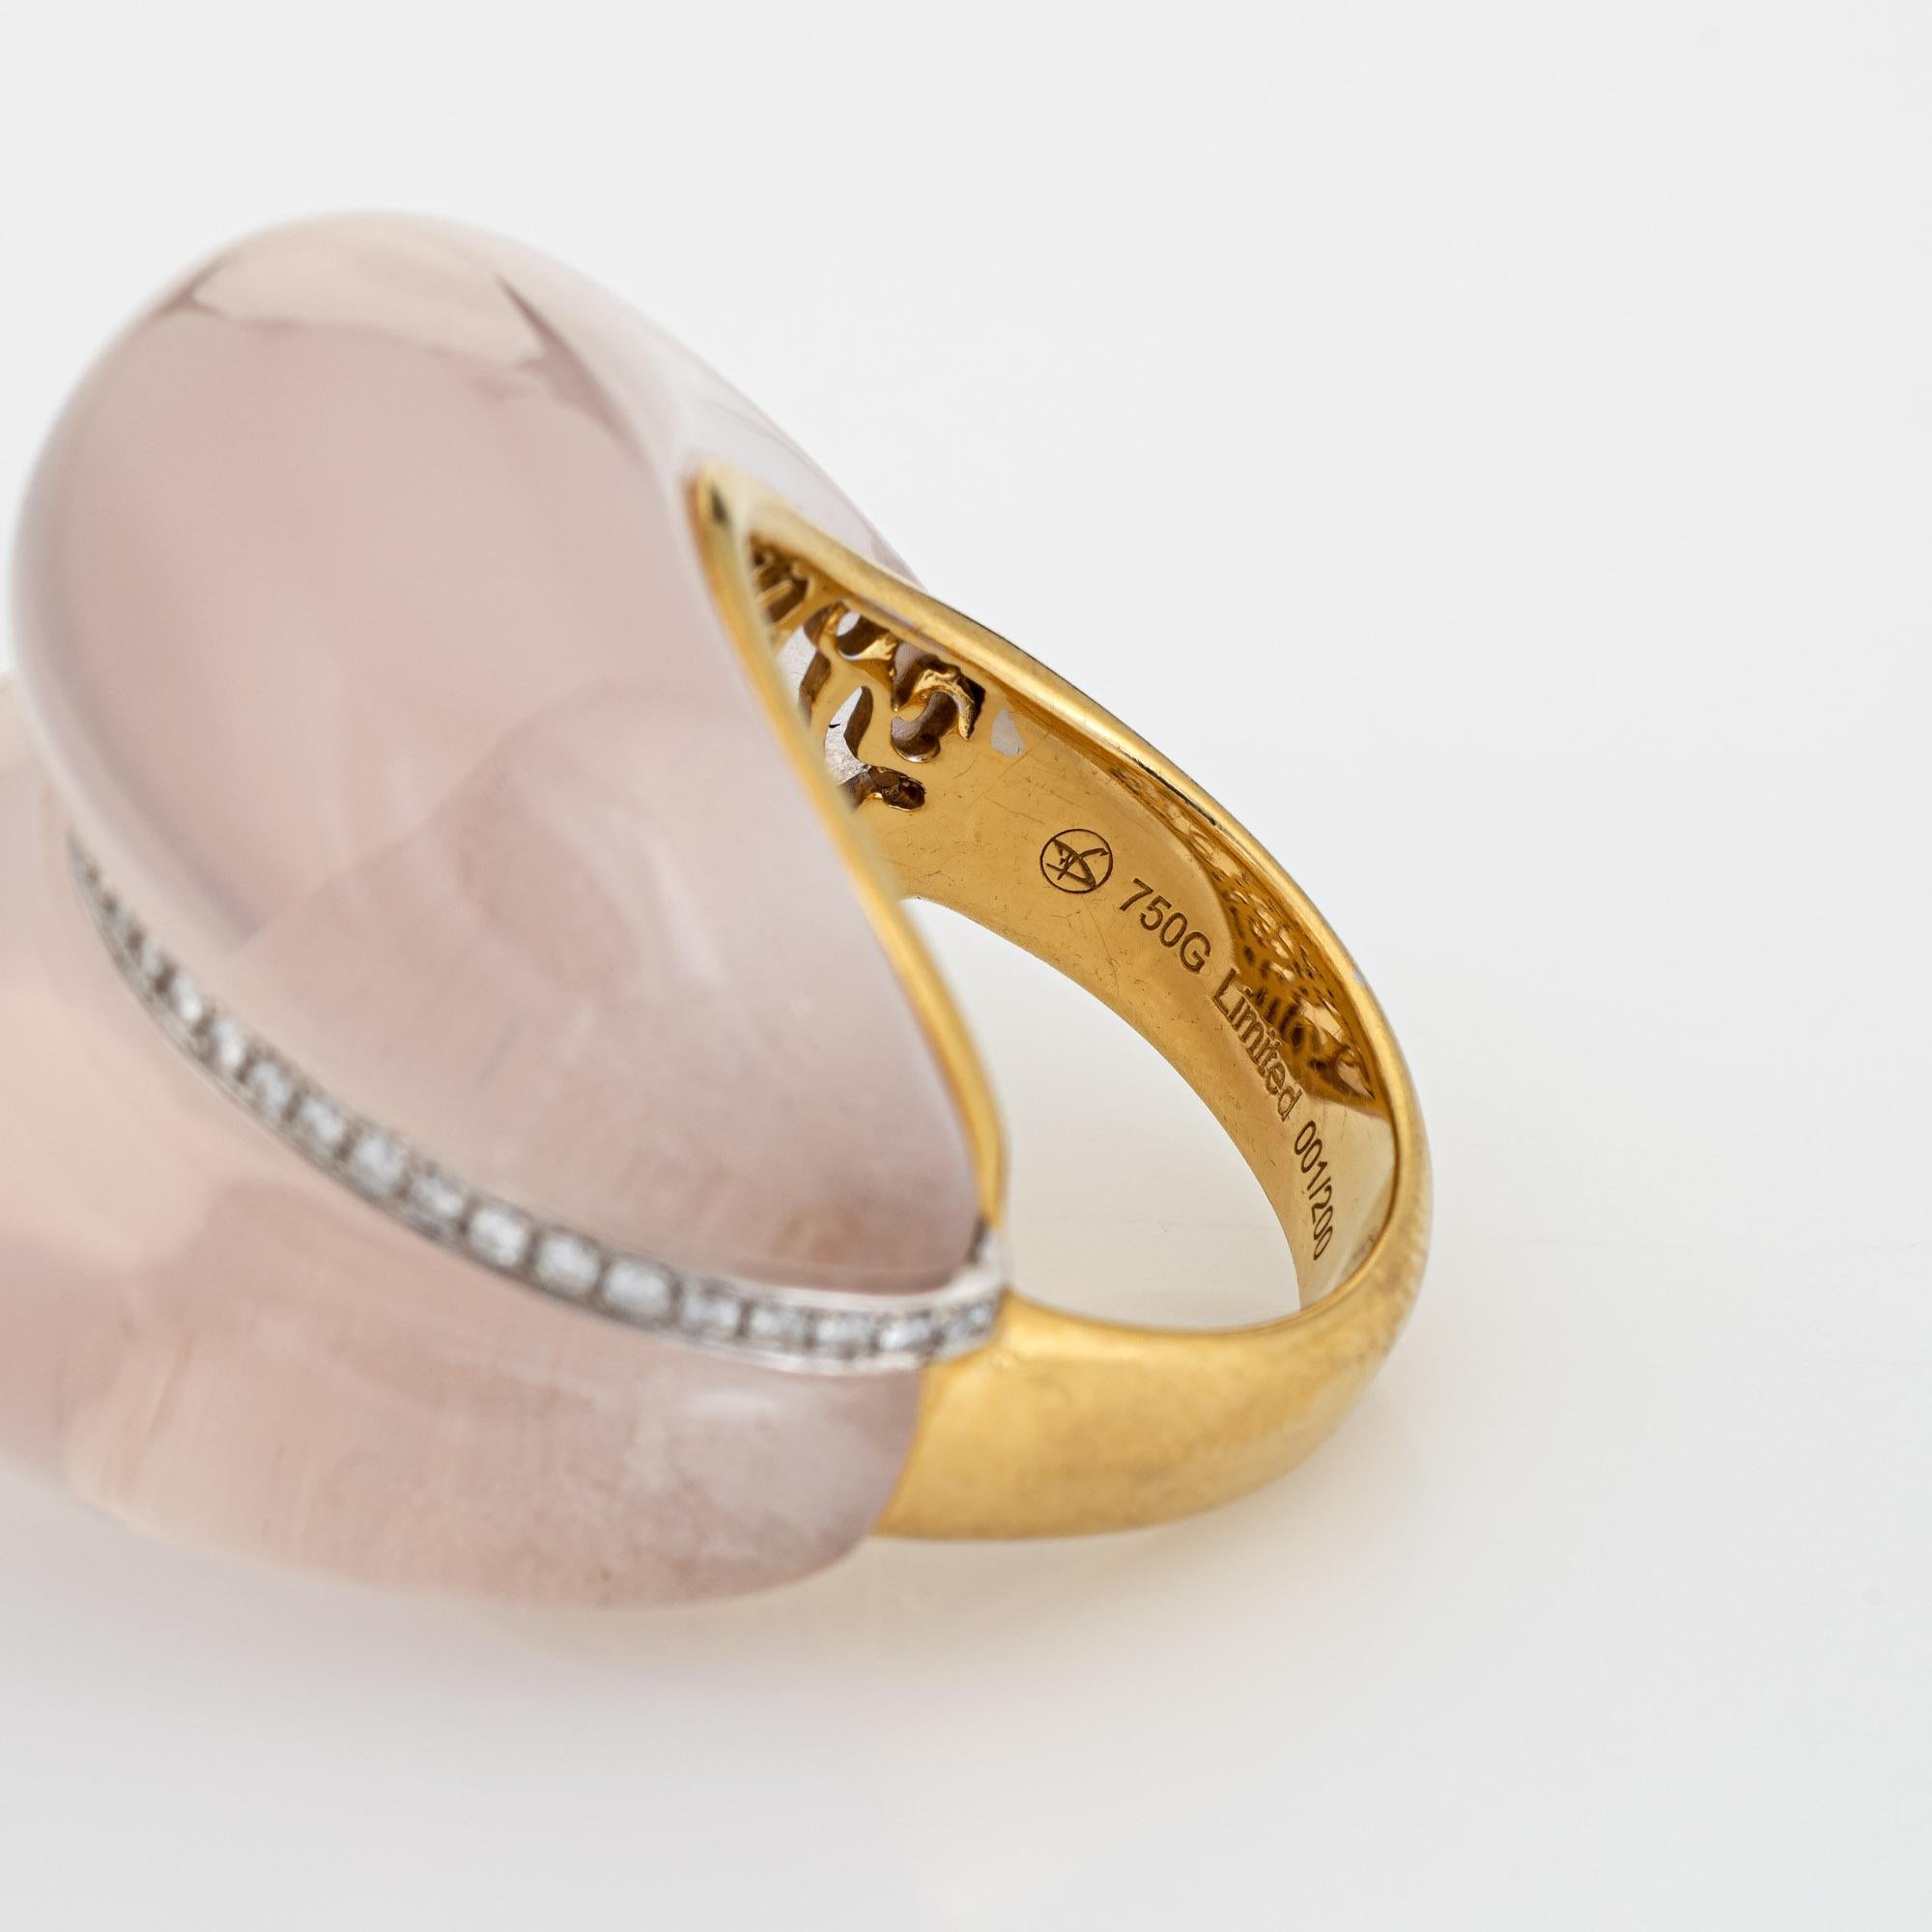 Contemporary Rose Quartz Diamond Ring Estate 18k Yellow Gold Limited Edition For Sale 2